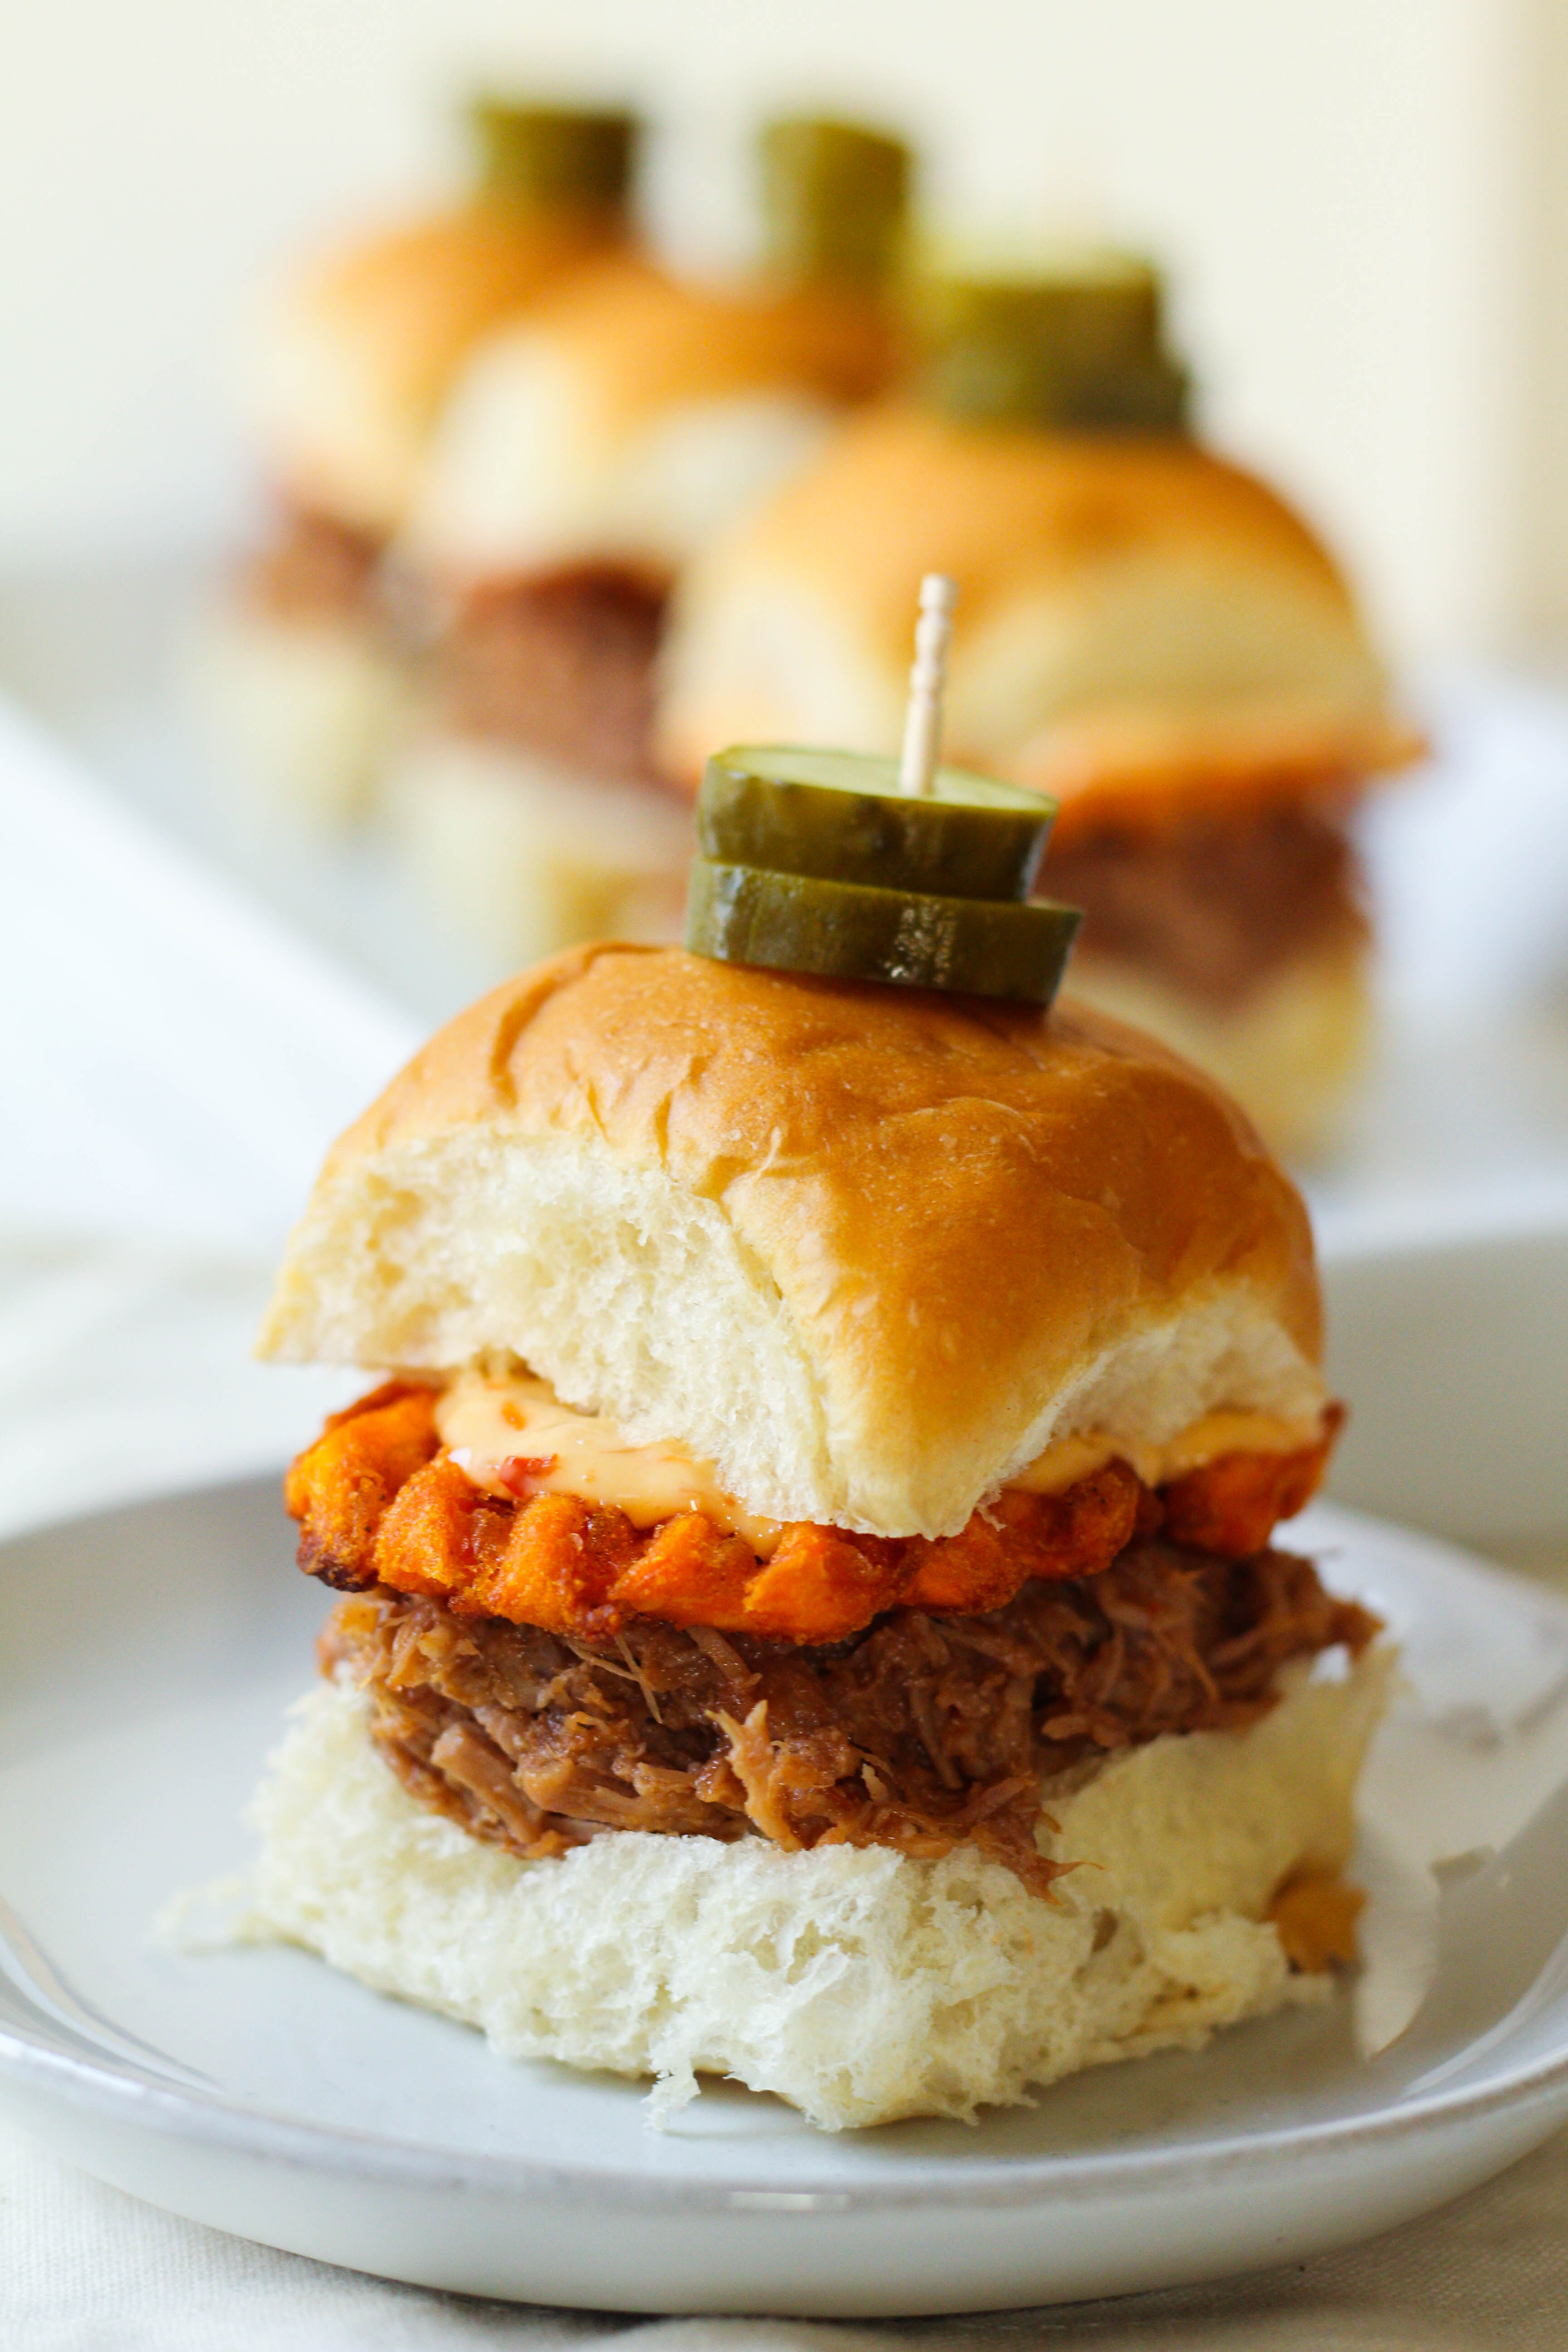 Instant Pot Pulled Pork Sliders with Sweet Chili Mayo Sauce